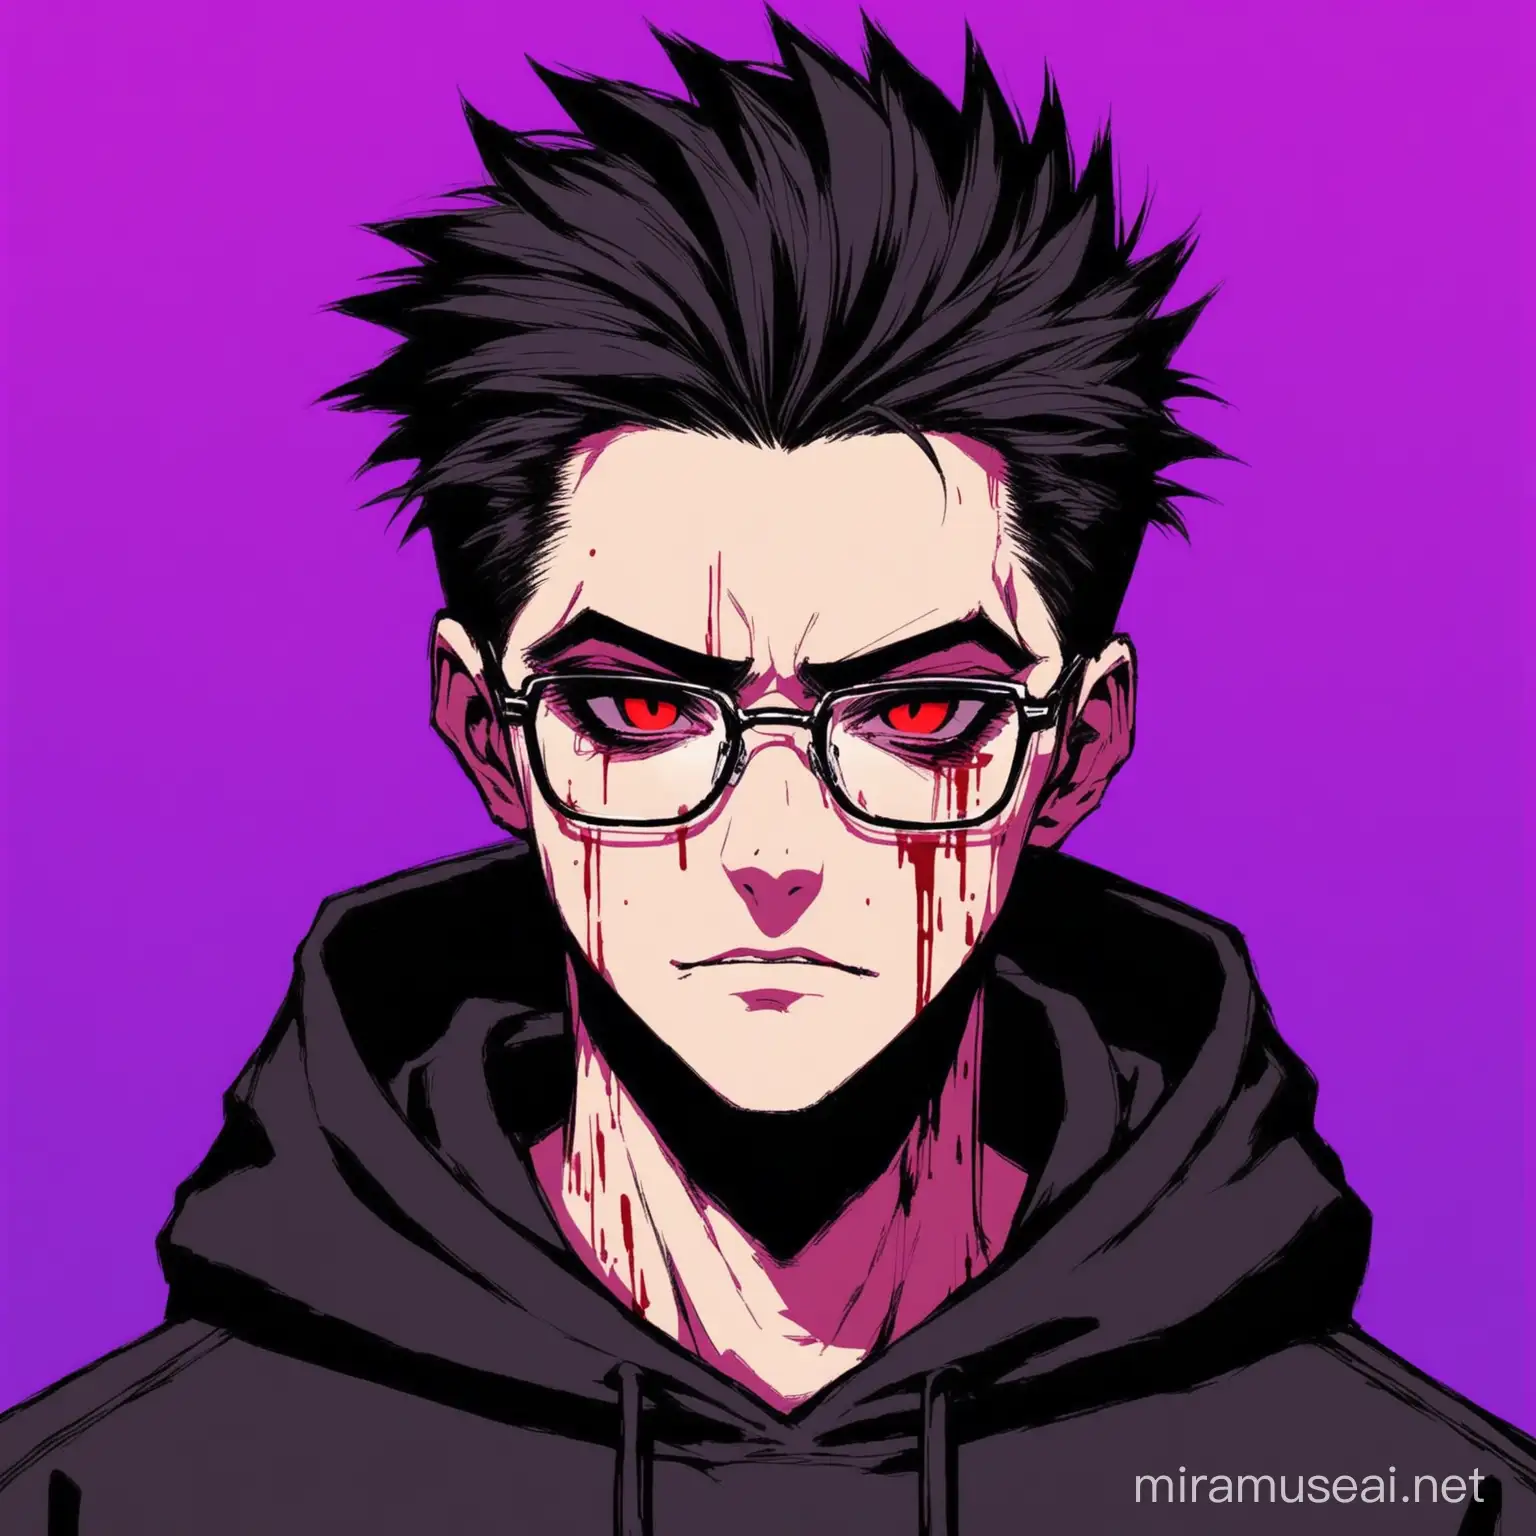 cool,hacker,black hoodie,glasses,quiff hairs,aesthetic,handome,aesthetic,psycho,oblong face,purple background with blood effect,anchor beared,black hairs,red eyes